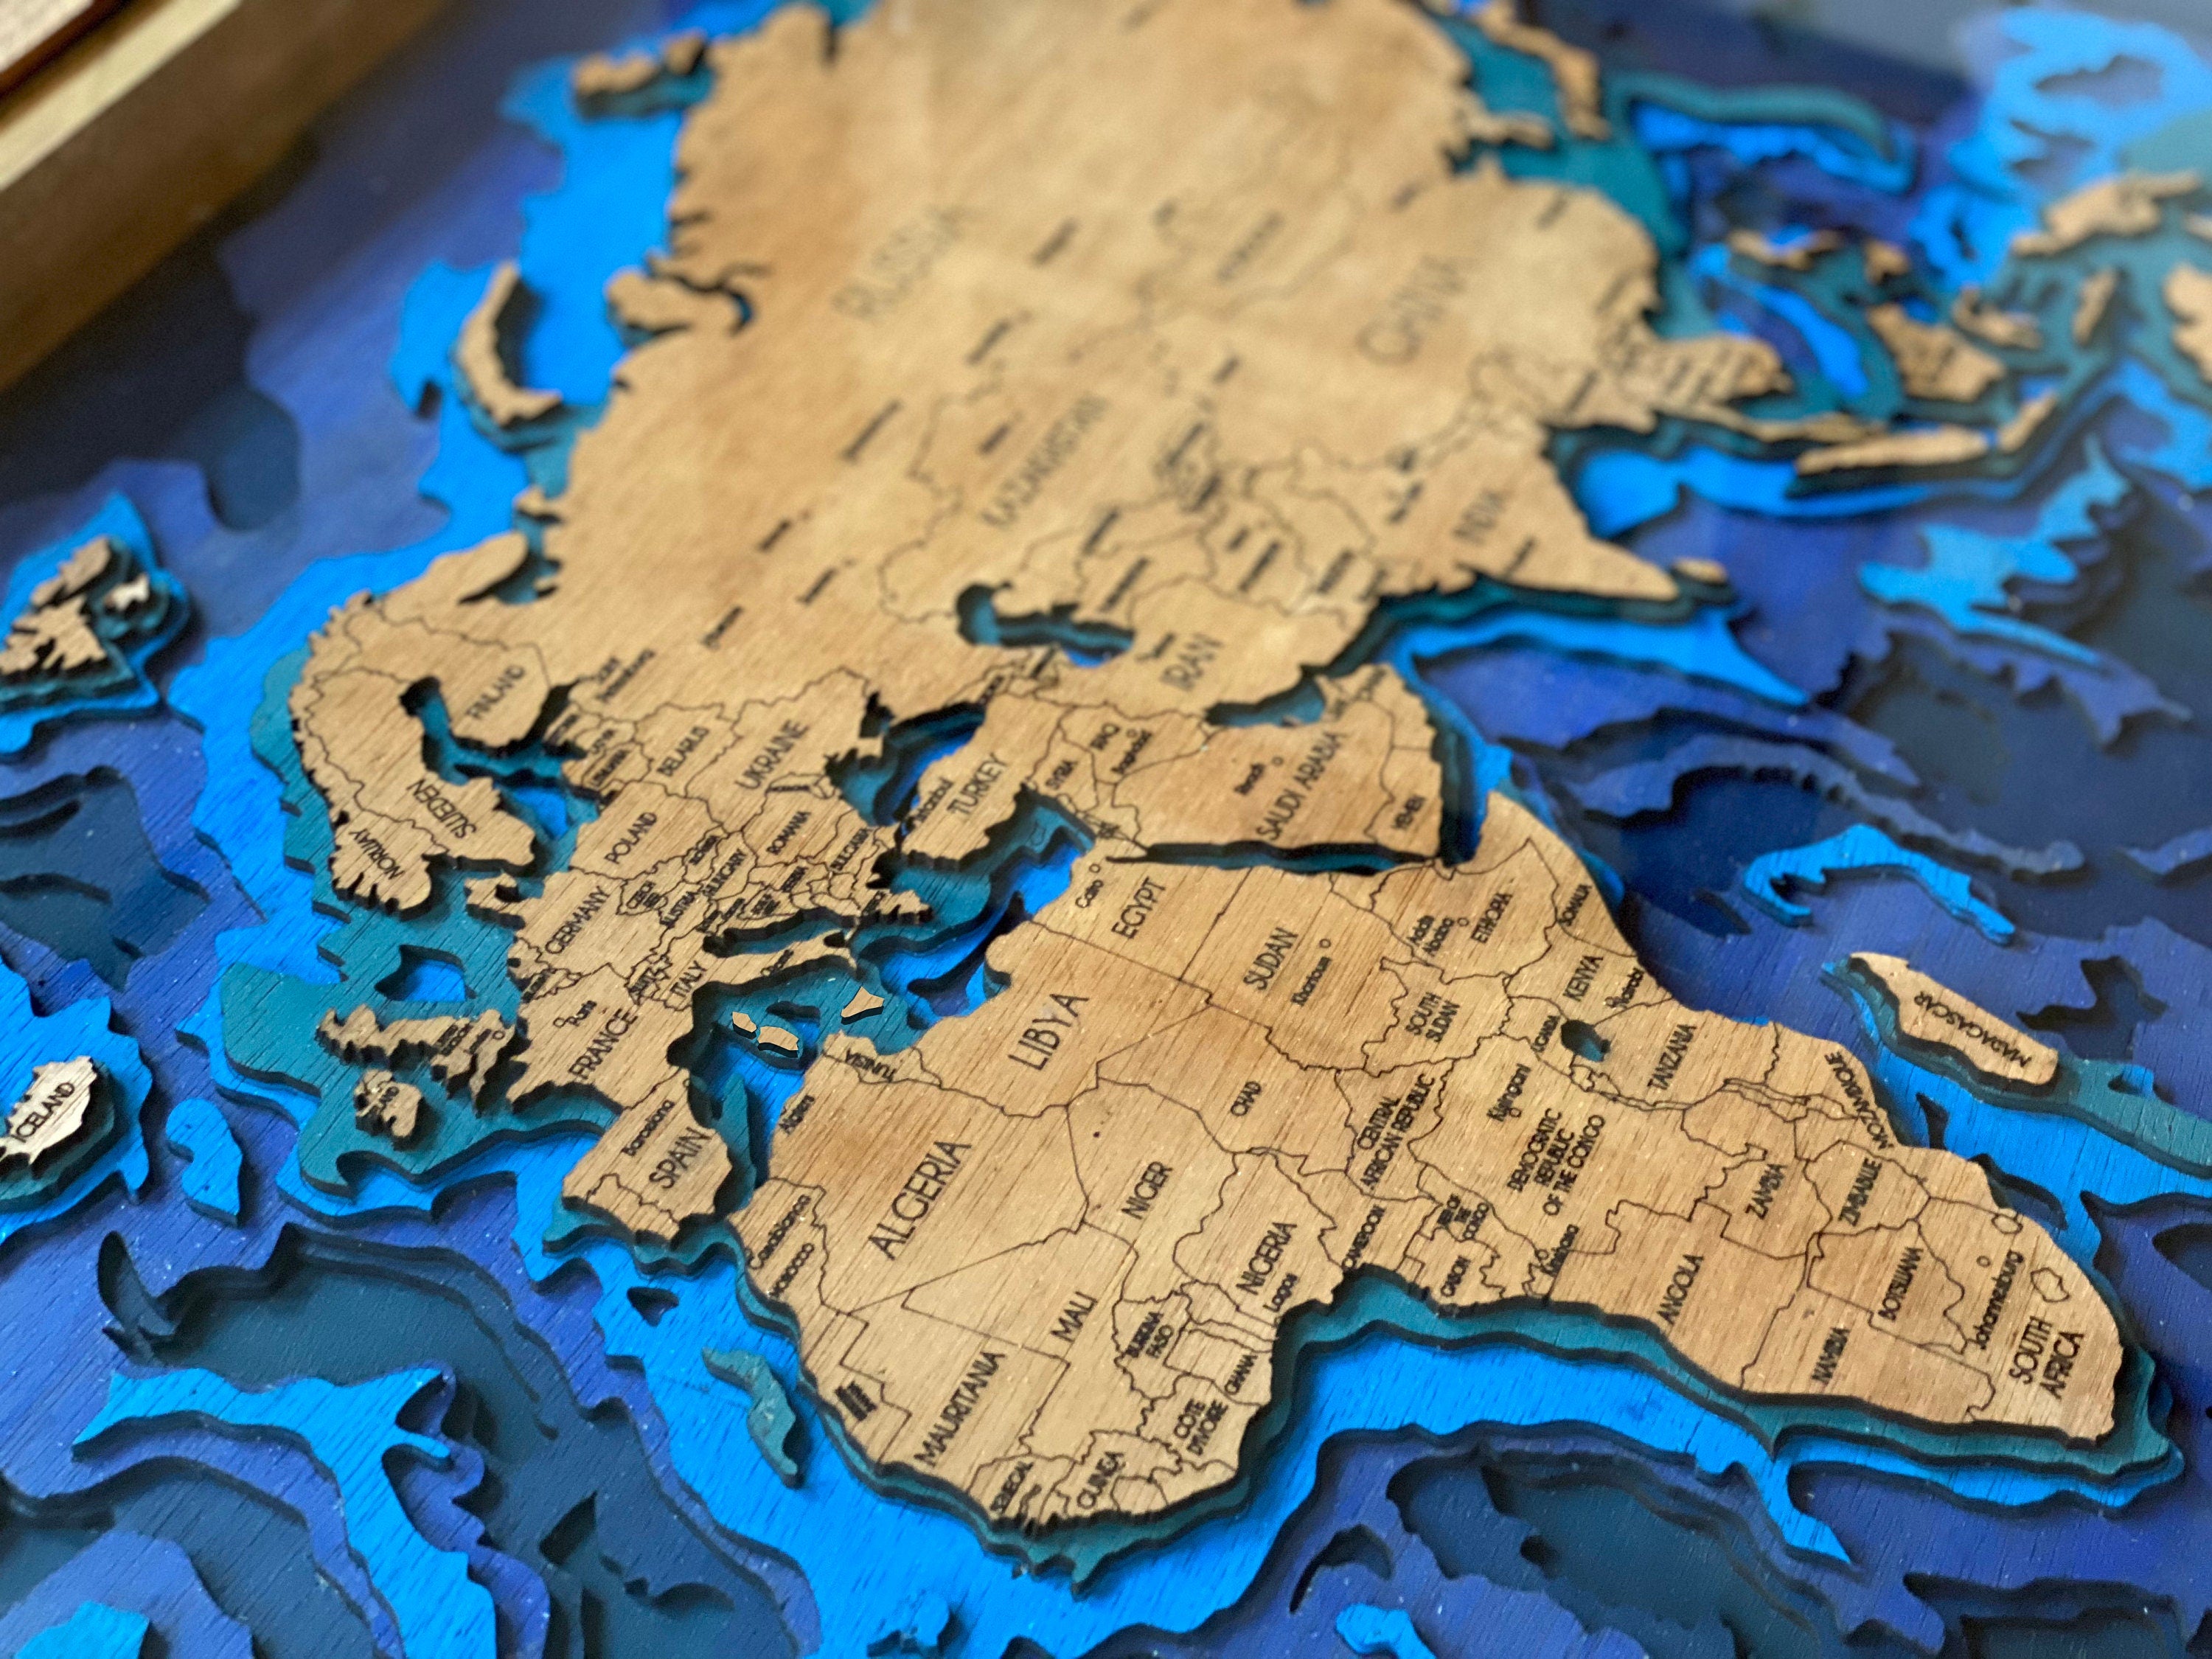 World Map Coffee Table with Ocean Bathymetric Layers - 24x36" - 100% Made in the USA